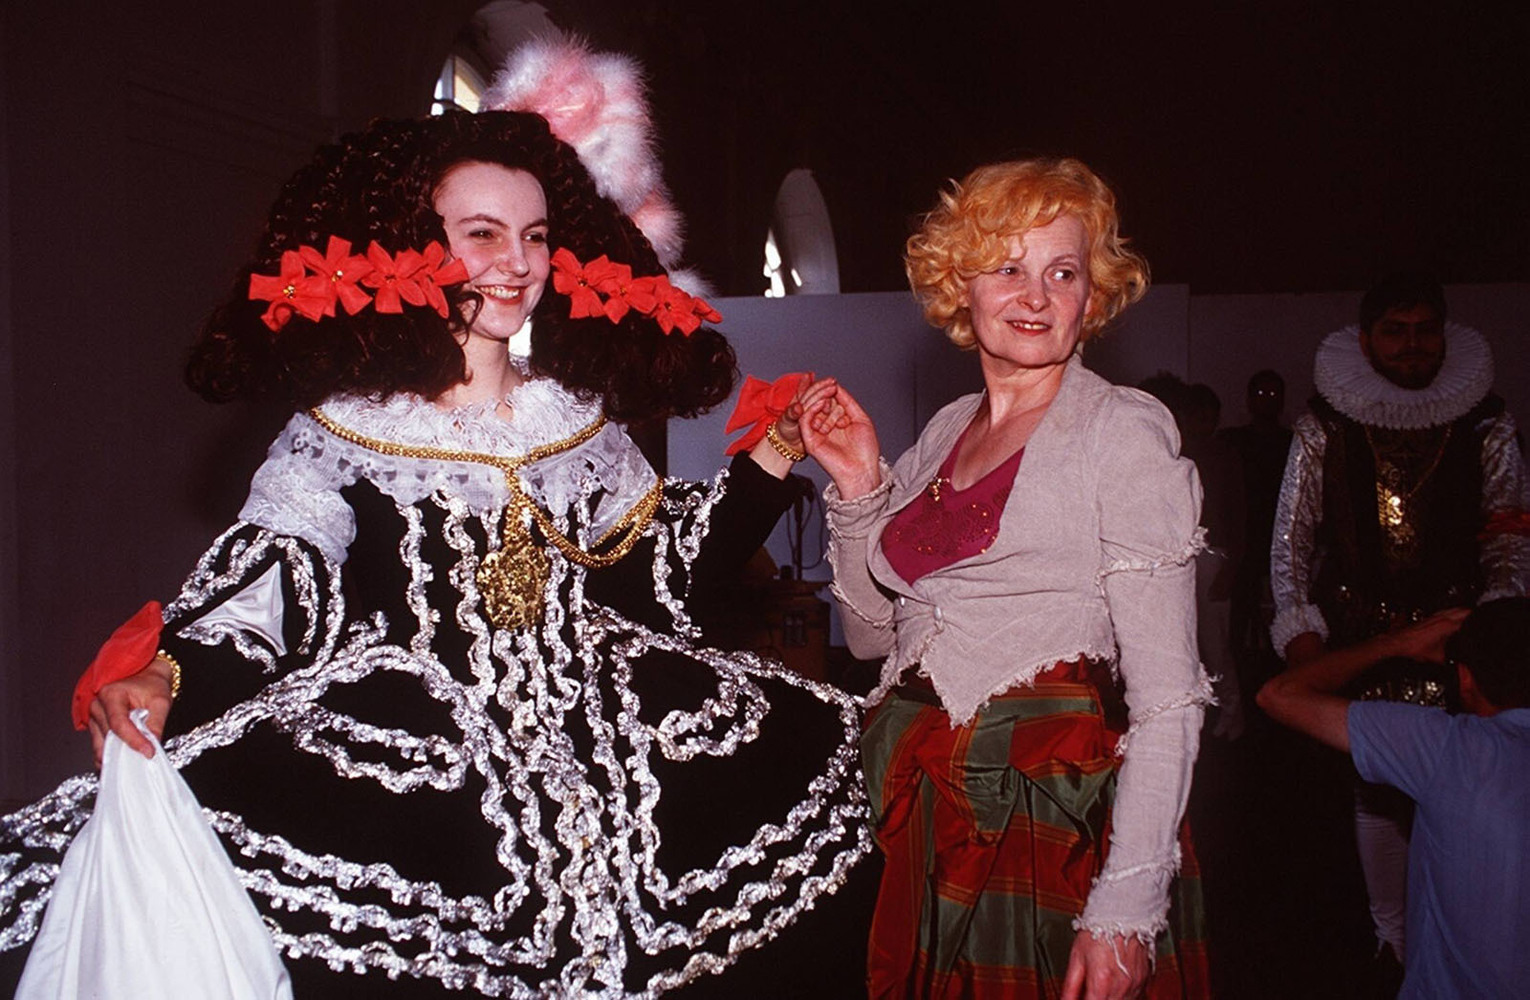 The main rebel of world fashion has died: the gallery of the inimitable Vivienne Westwood